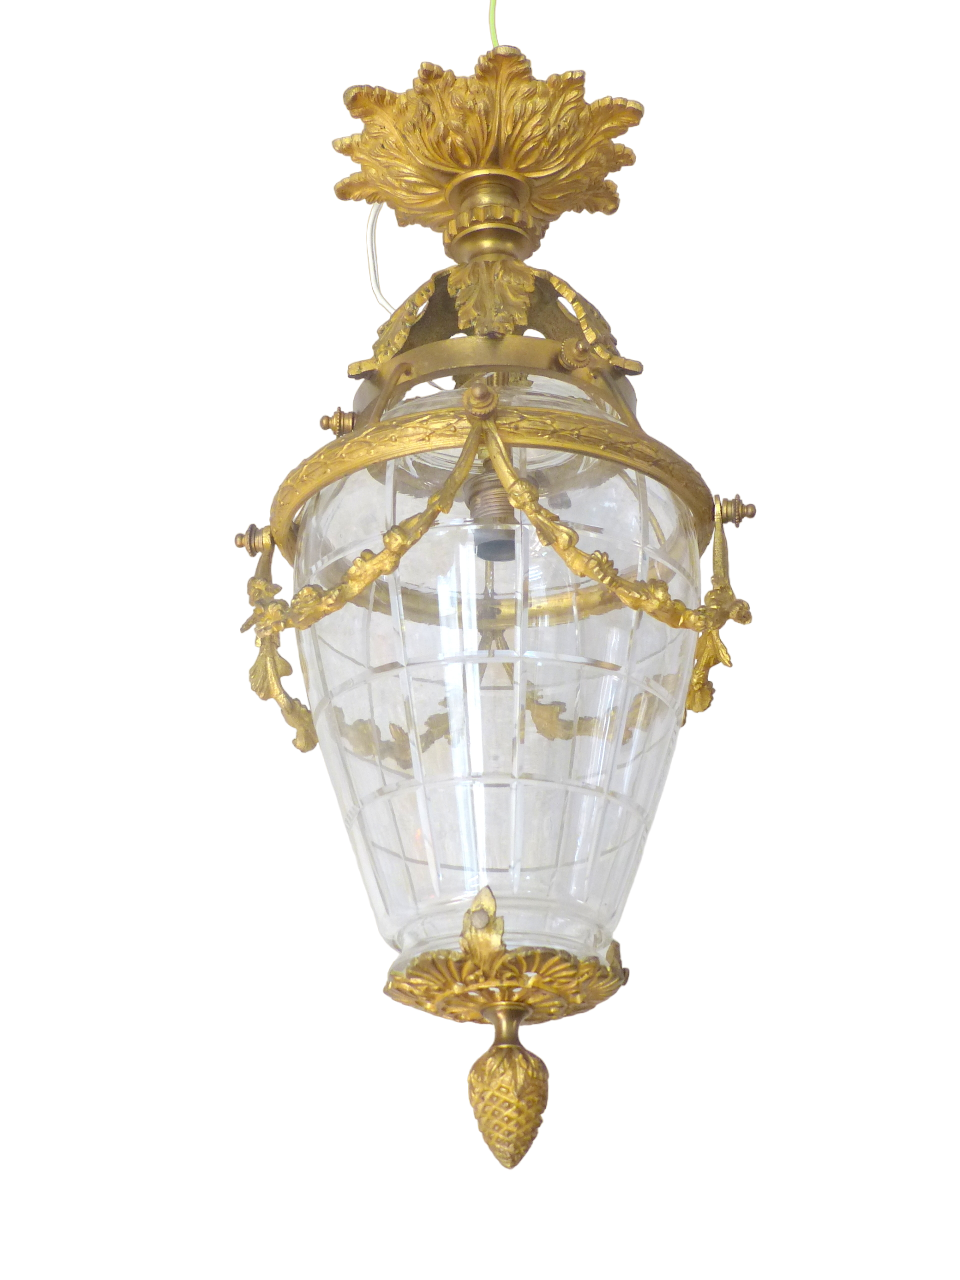 Gorgeous French Hall Lantern 19TH Chandelier Gilded Bronze Cut Crystal Ceiling